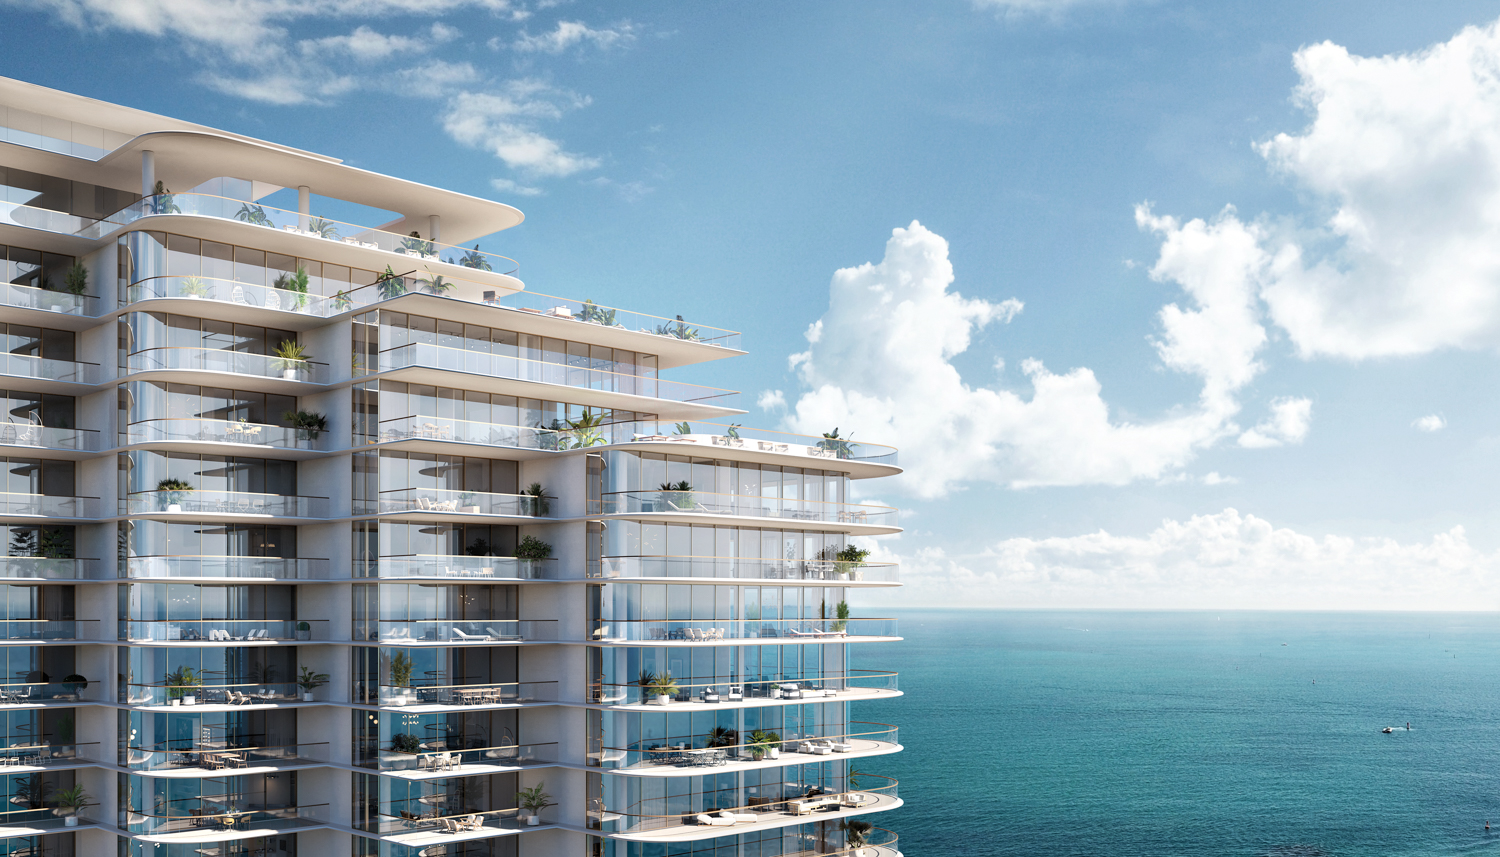 Exterior rendering of top several floors of high-rise condo building overlooking the water